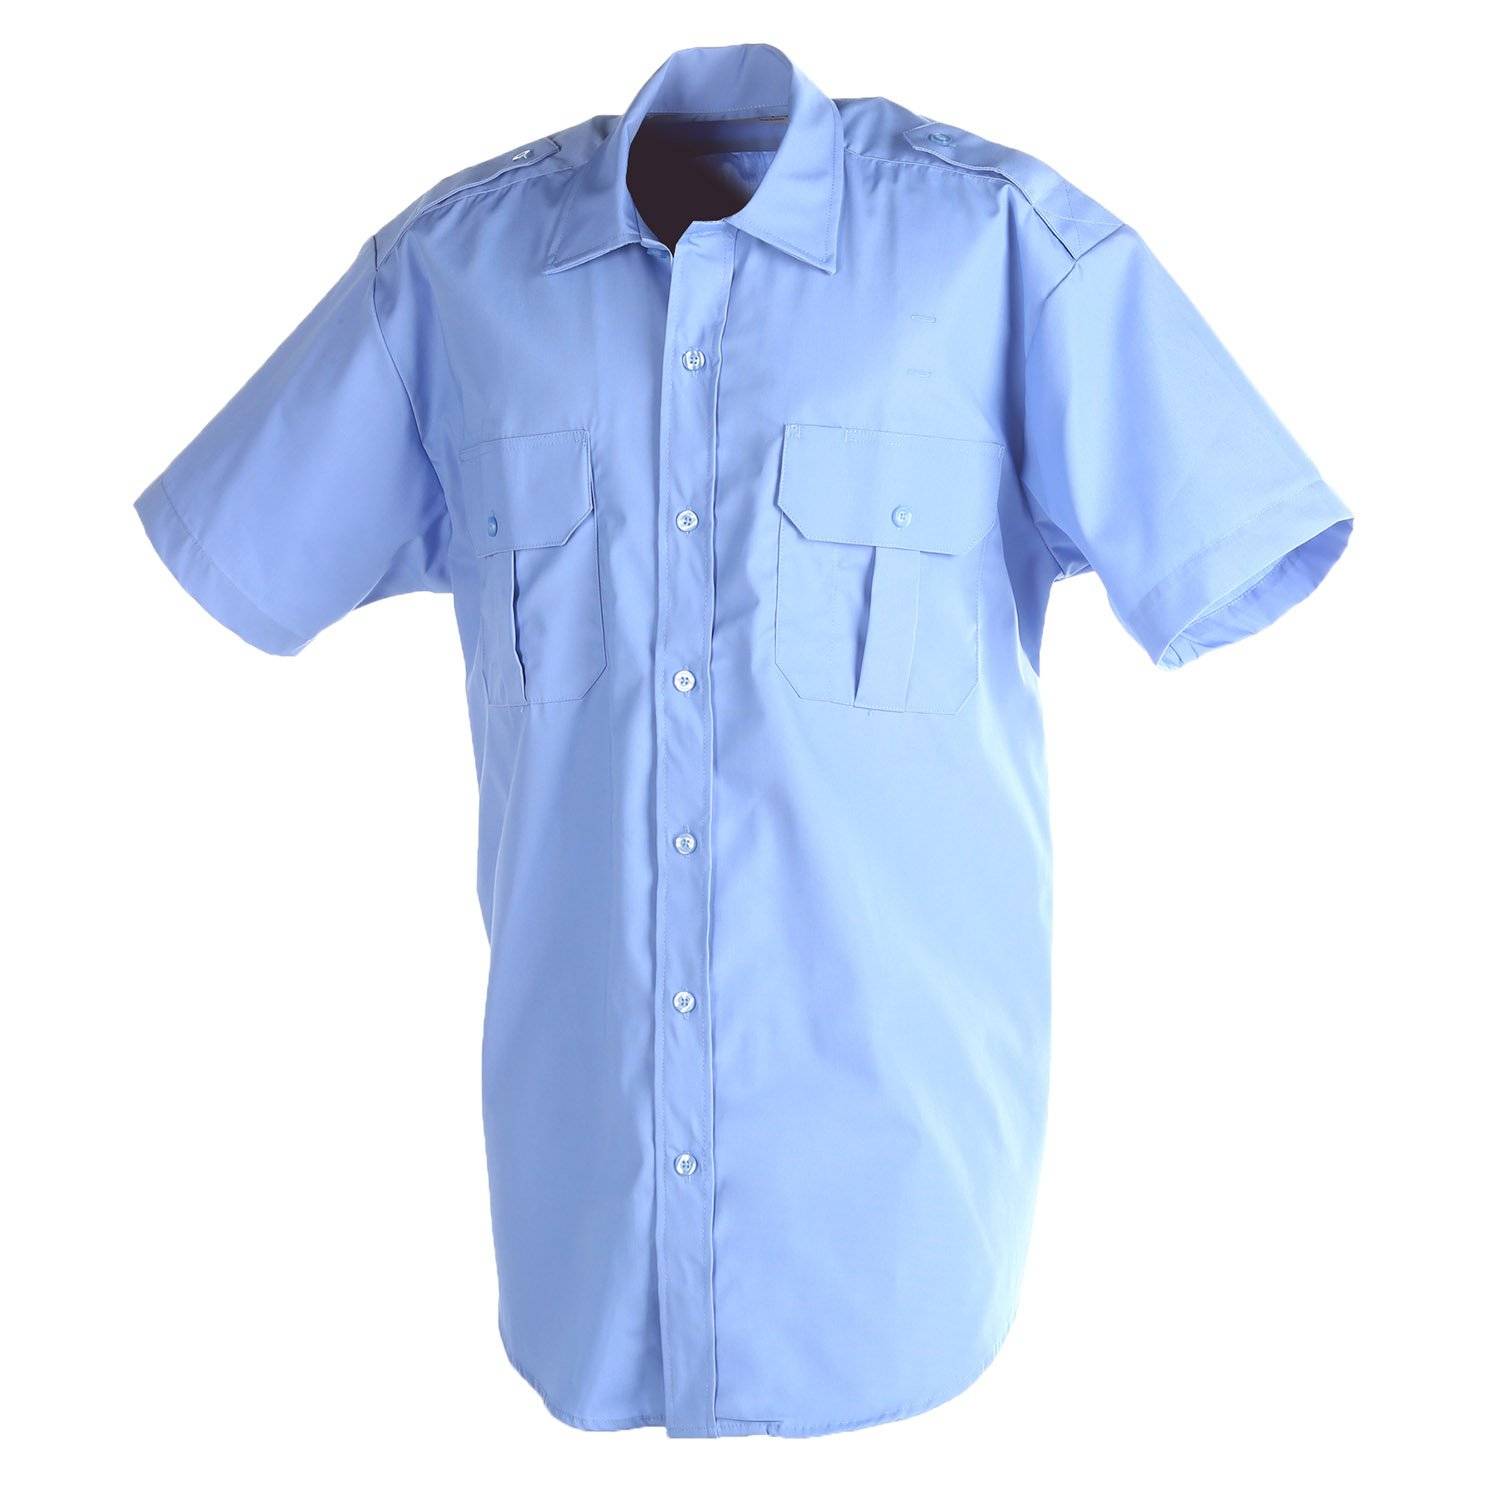 DUTYPRO SHORT SLEEVE POLY COTTON TRADITIONAL STYLE SHIRT